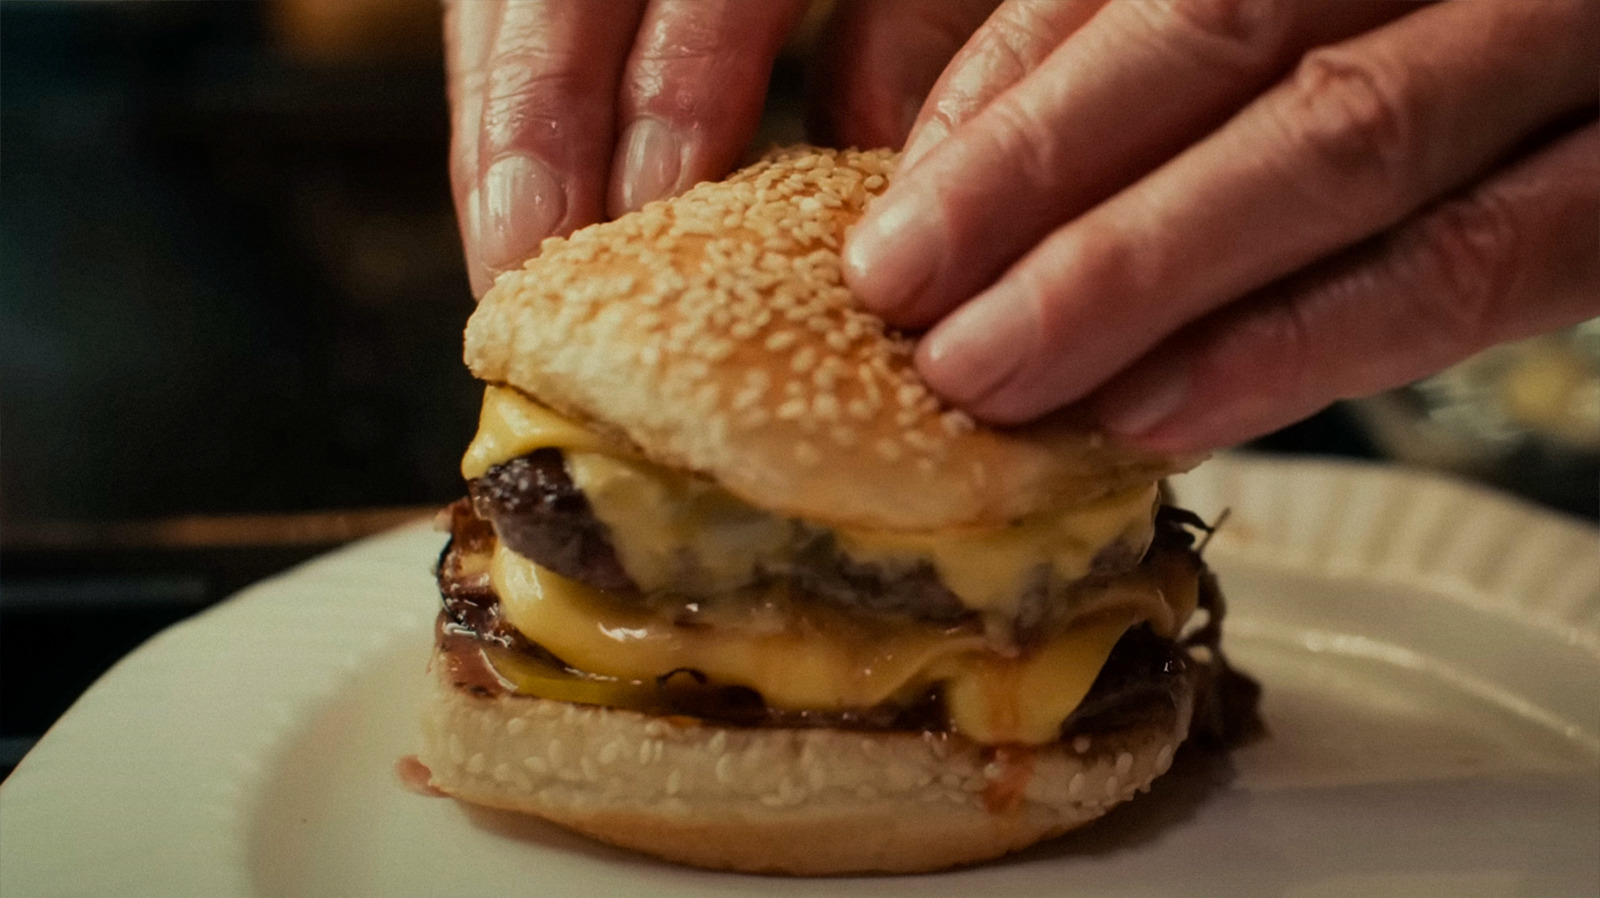 https://www.slashfilm.com/img/gallery/learn-how-to-make-that-delicious-cheeseburger-from-the-menu-thanks-to-binging-with-babish/l-intro-1675042404.jpg